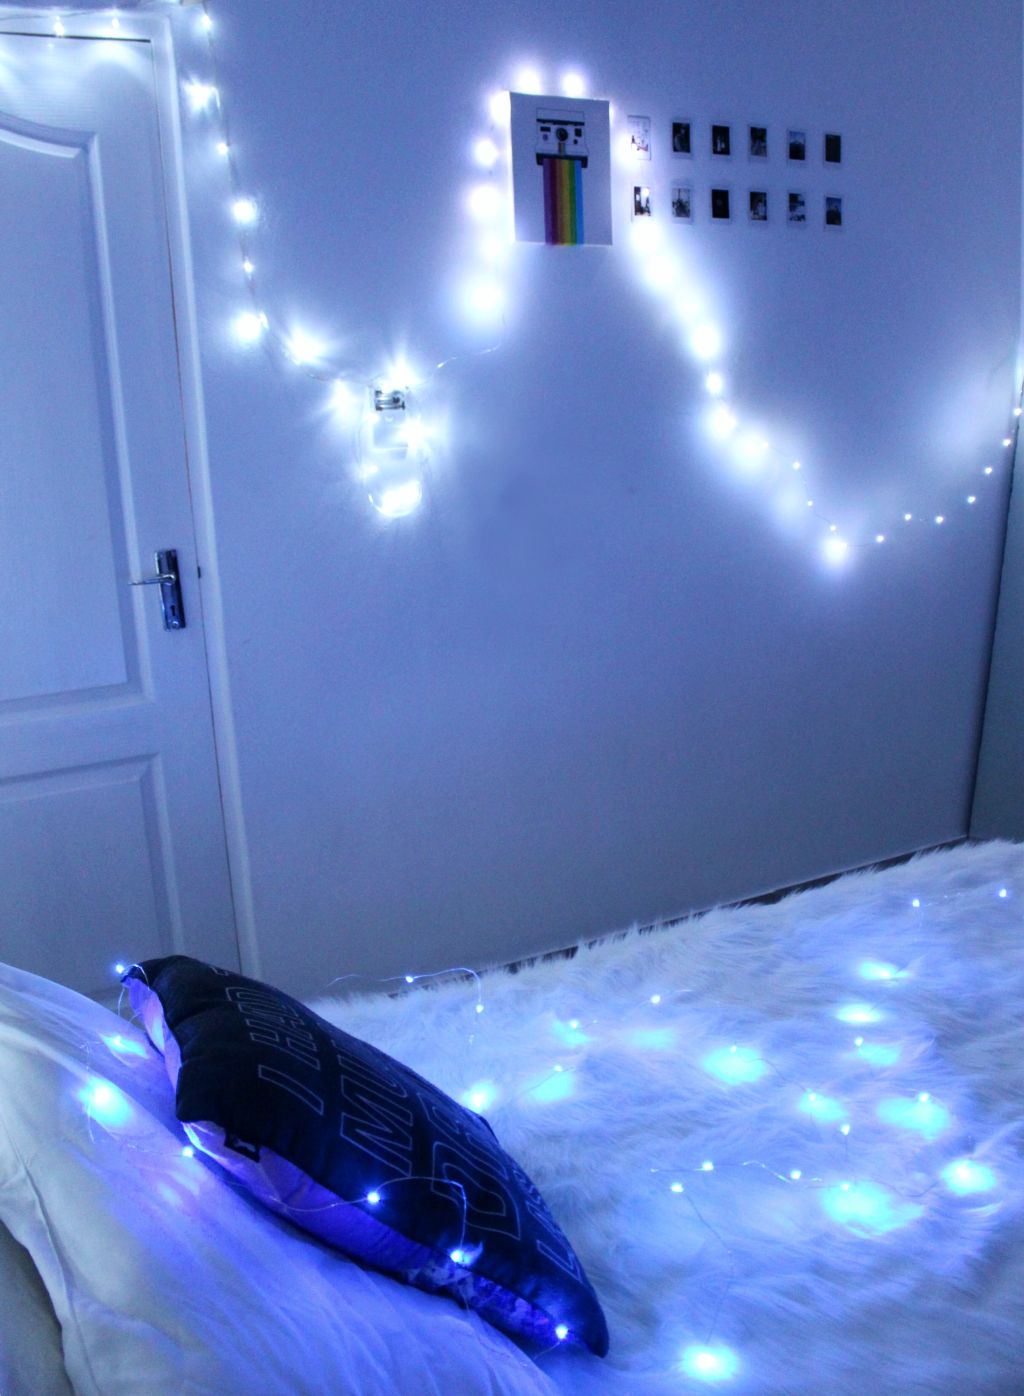 46+ Aesthetic Bedroom With Fairy Lights, Great!